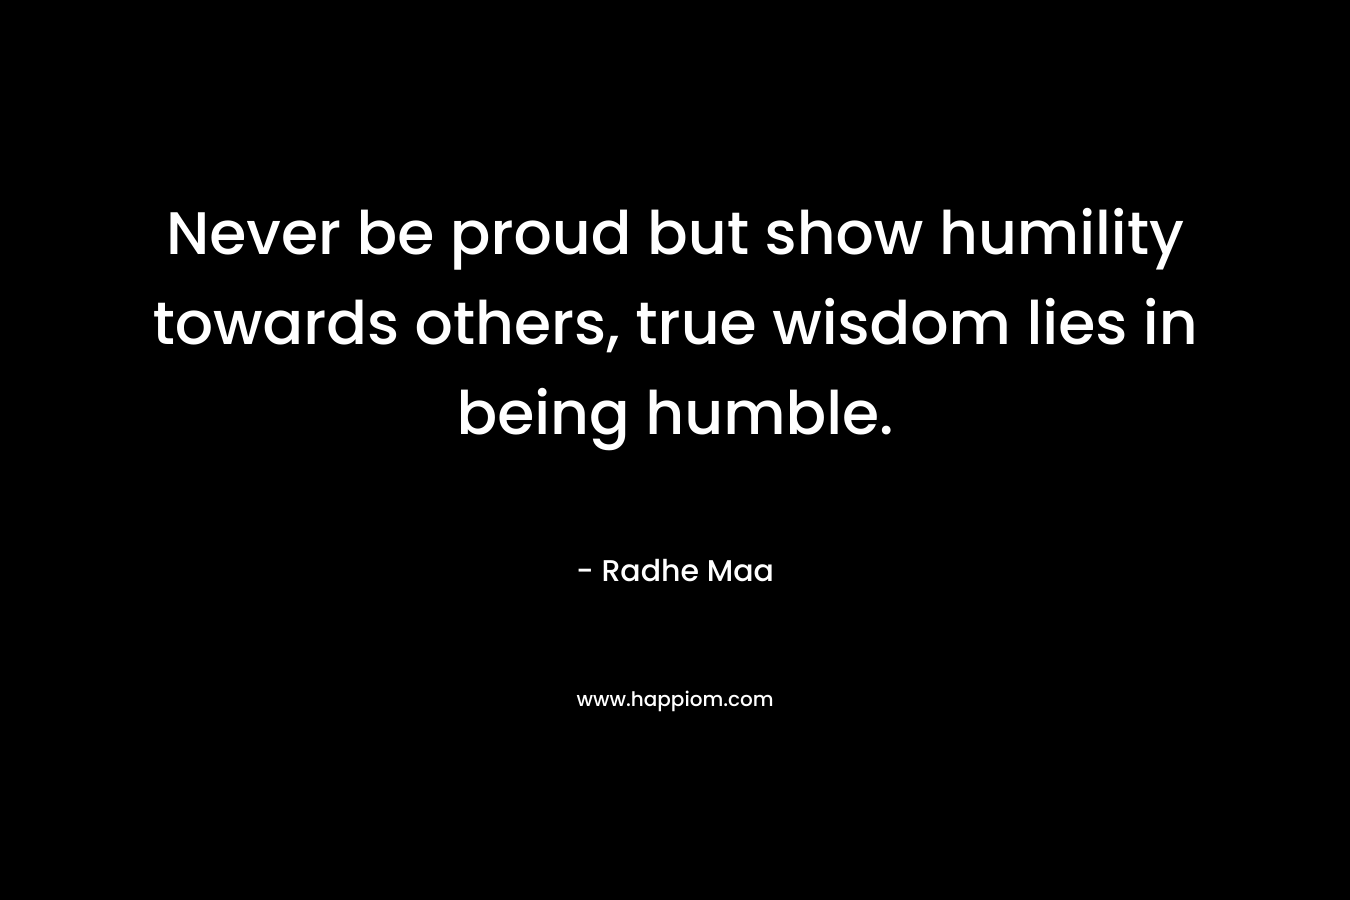 Never be proud but show humility towards others, true wisdom lies in being humble.